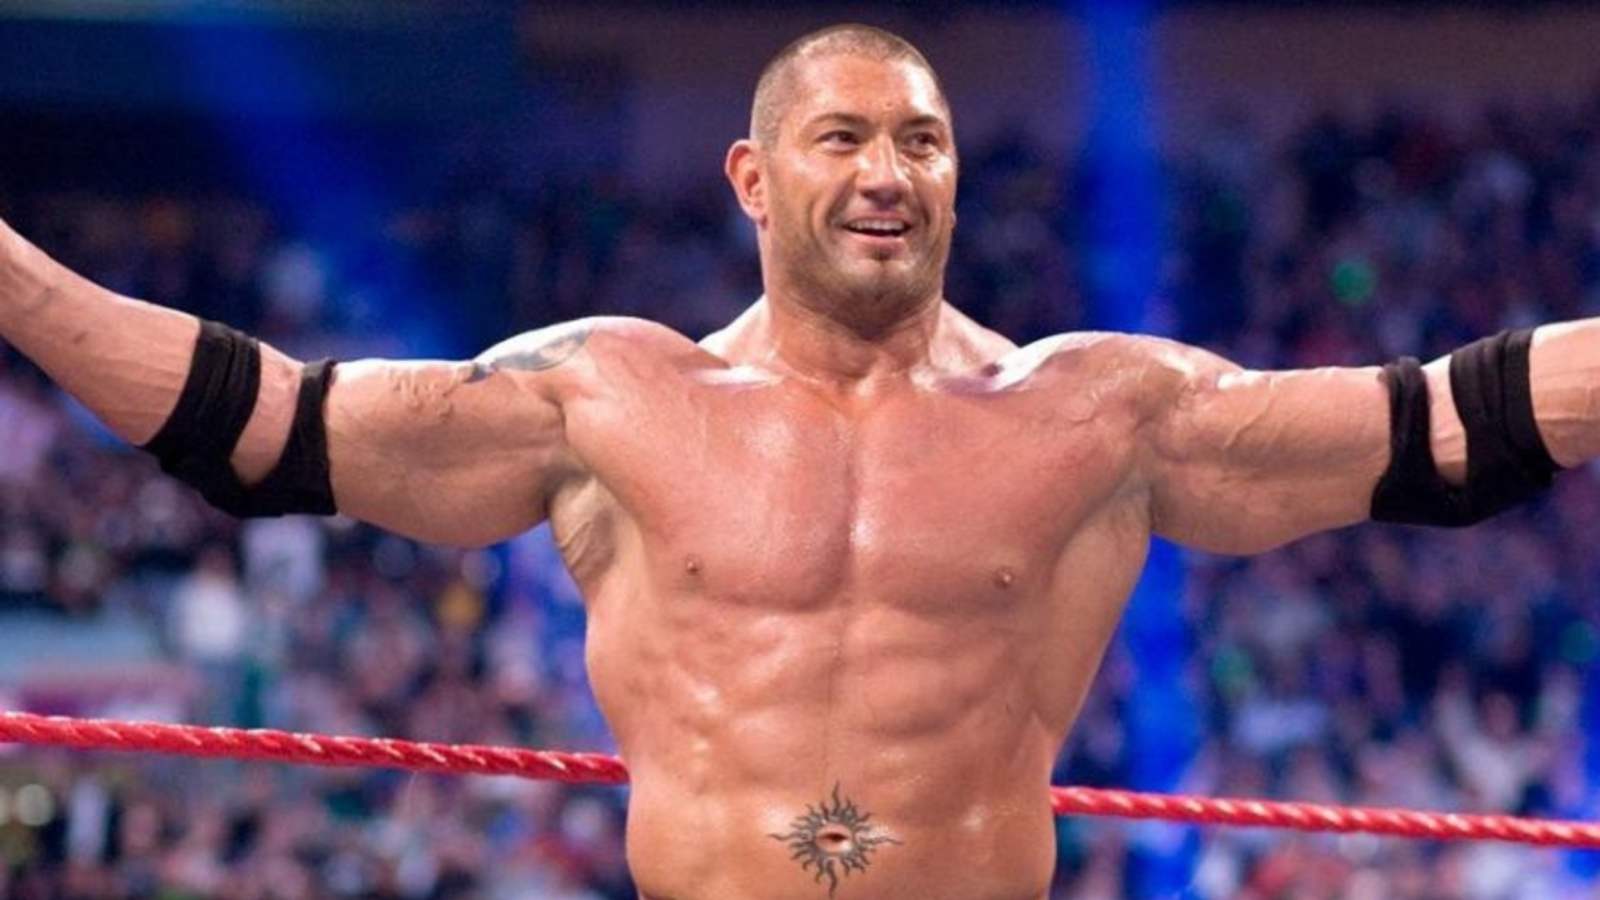 ‘Baffling!’ says Batista on WWE’s decision not to reassemble The Hurt Business.